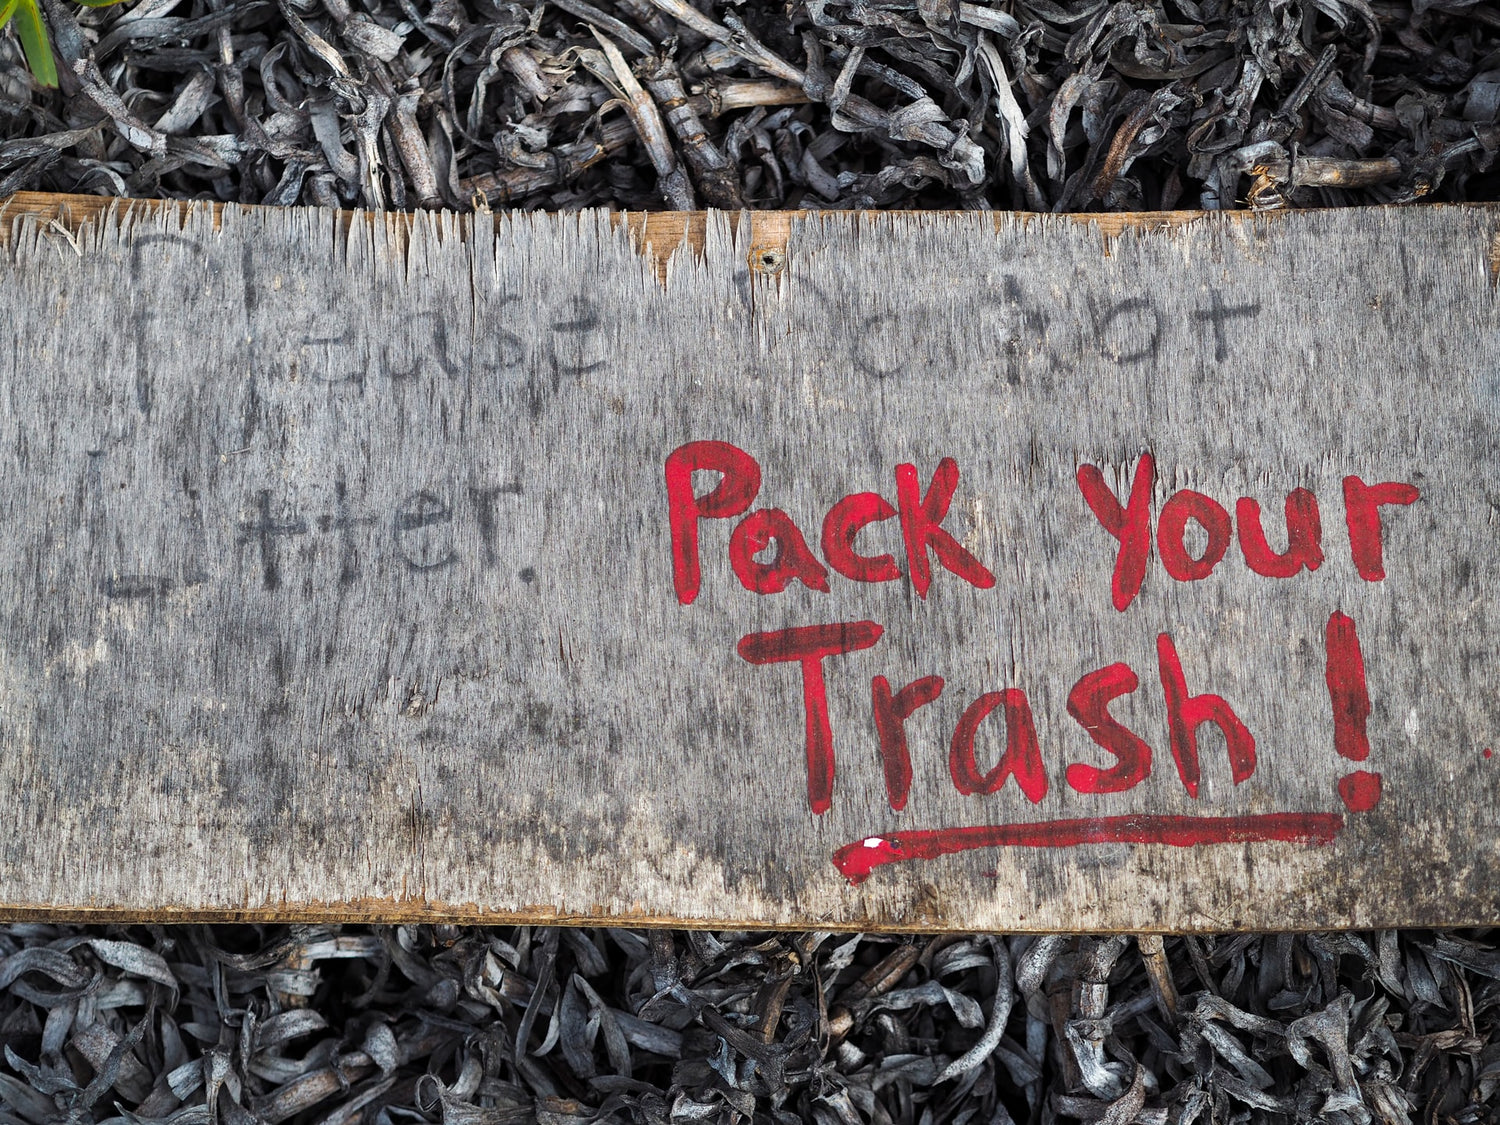 Trash Talk: A Case for Picking Up Litter on the Trail